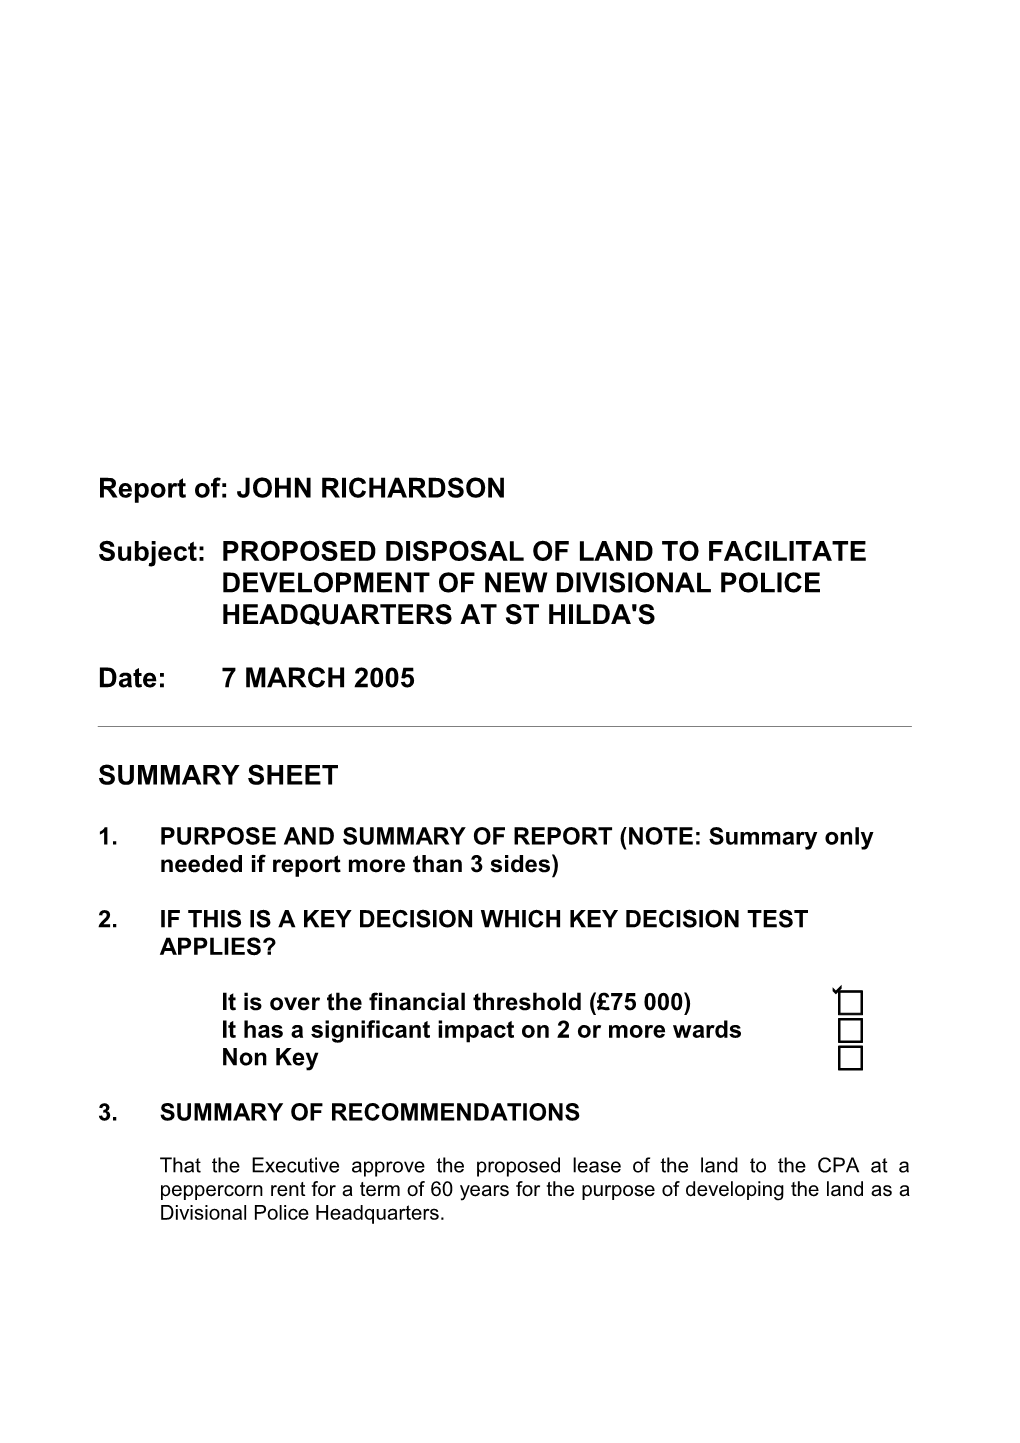 Subject: PROPOSED DISPOSAL of LAND to FACILITATE DEVELOPMENT of NEW DIVISIONAL POLICE